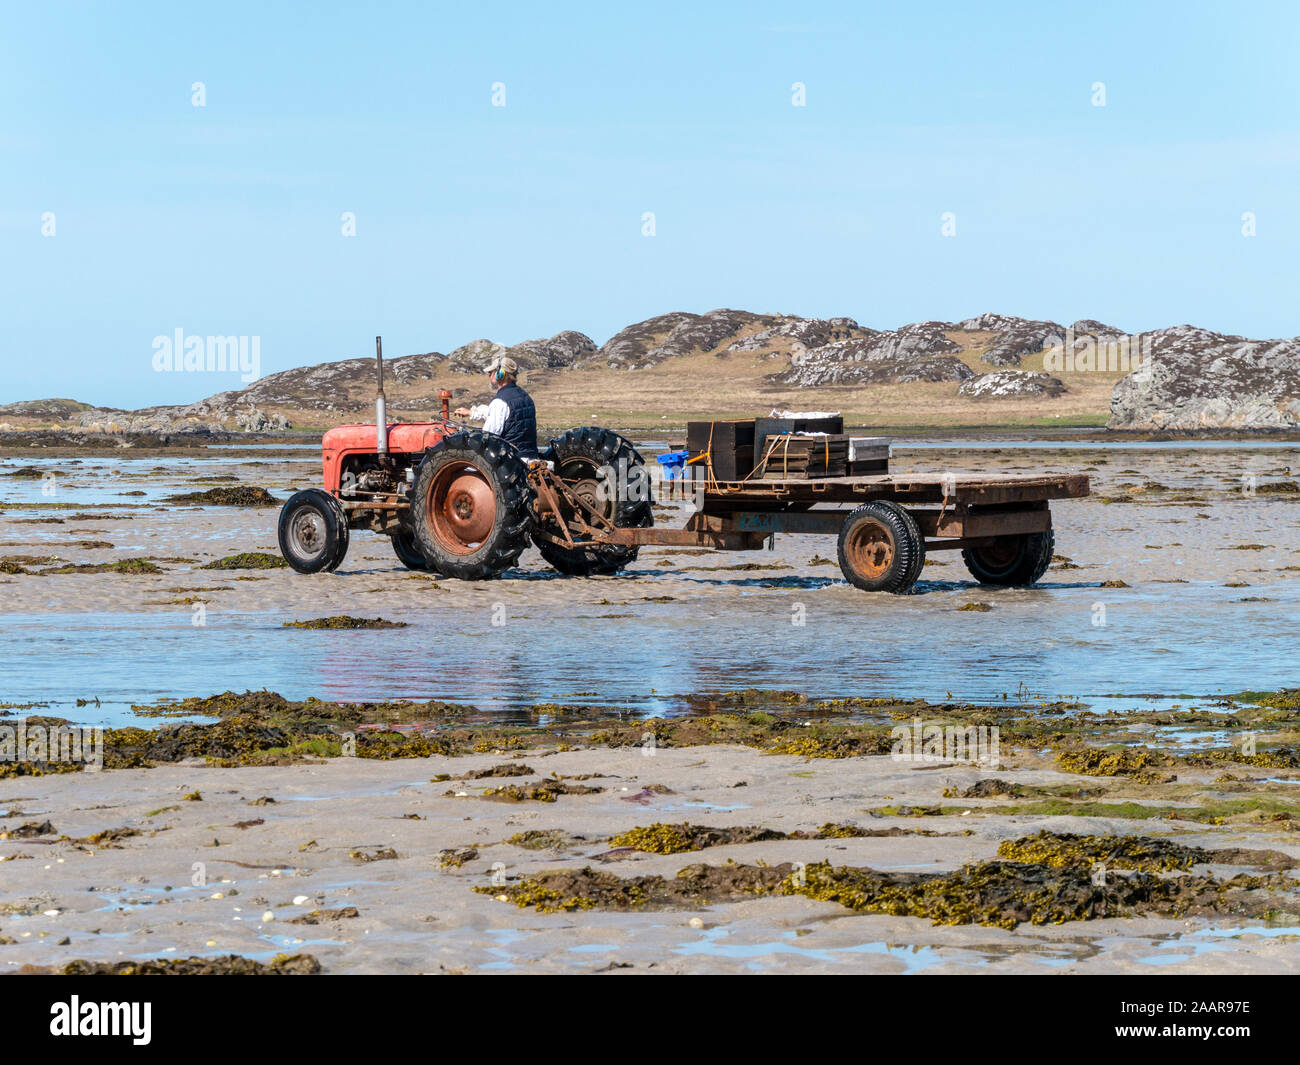 Old, red Massey Ferguson tractor and trailer on the beach near the Oyster farm, The Strand, The Isle of Colonsay, Scotland, UK Stock Photo